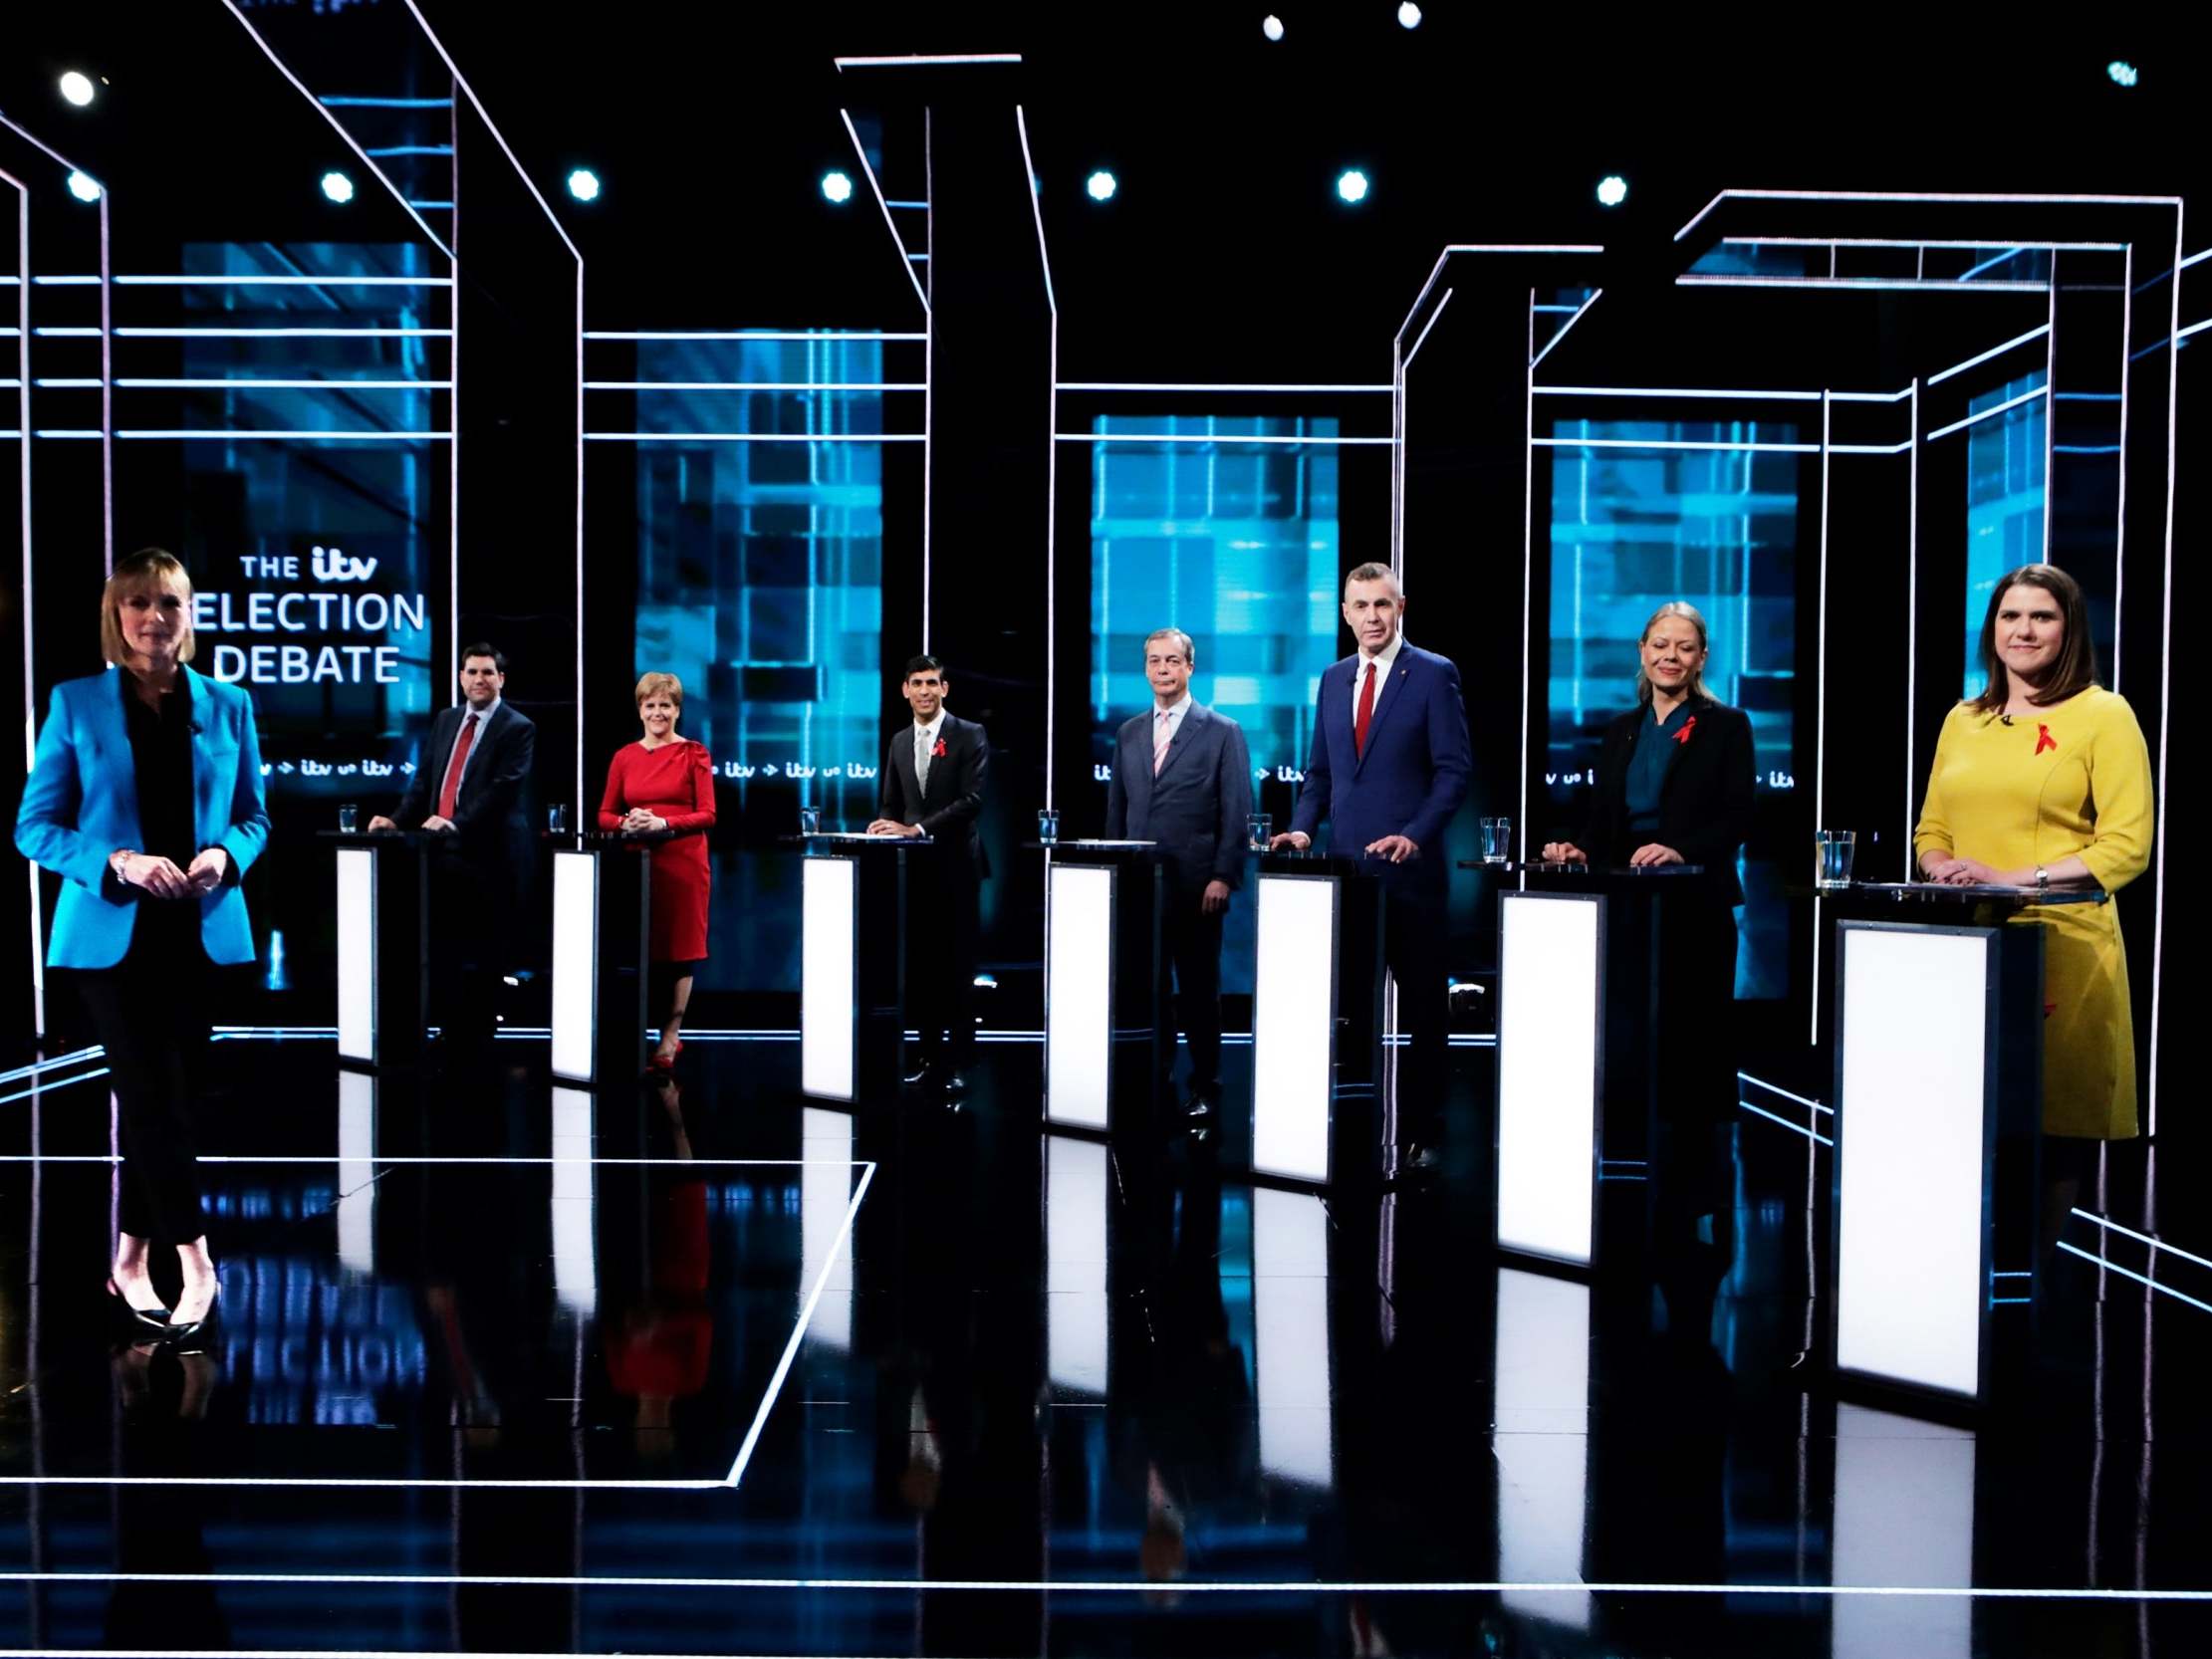 Julie Etchingham hosted a particularly crowded election debate in 2019